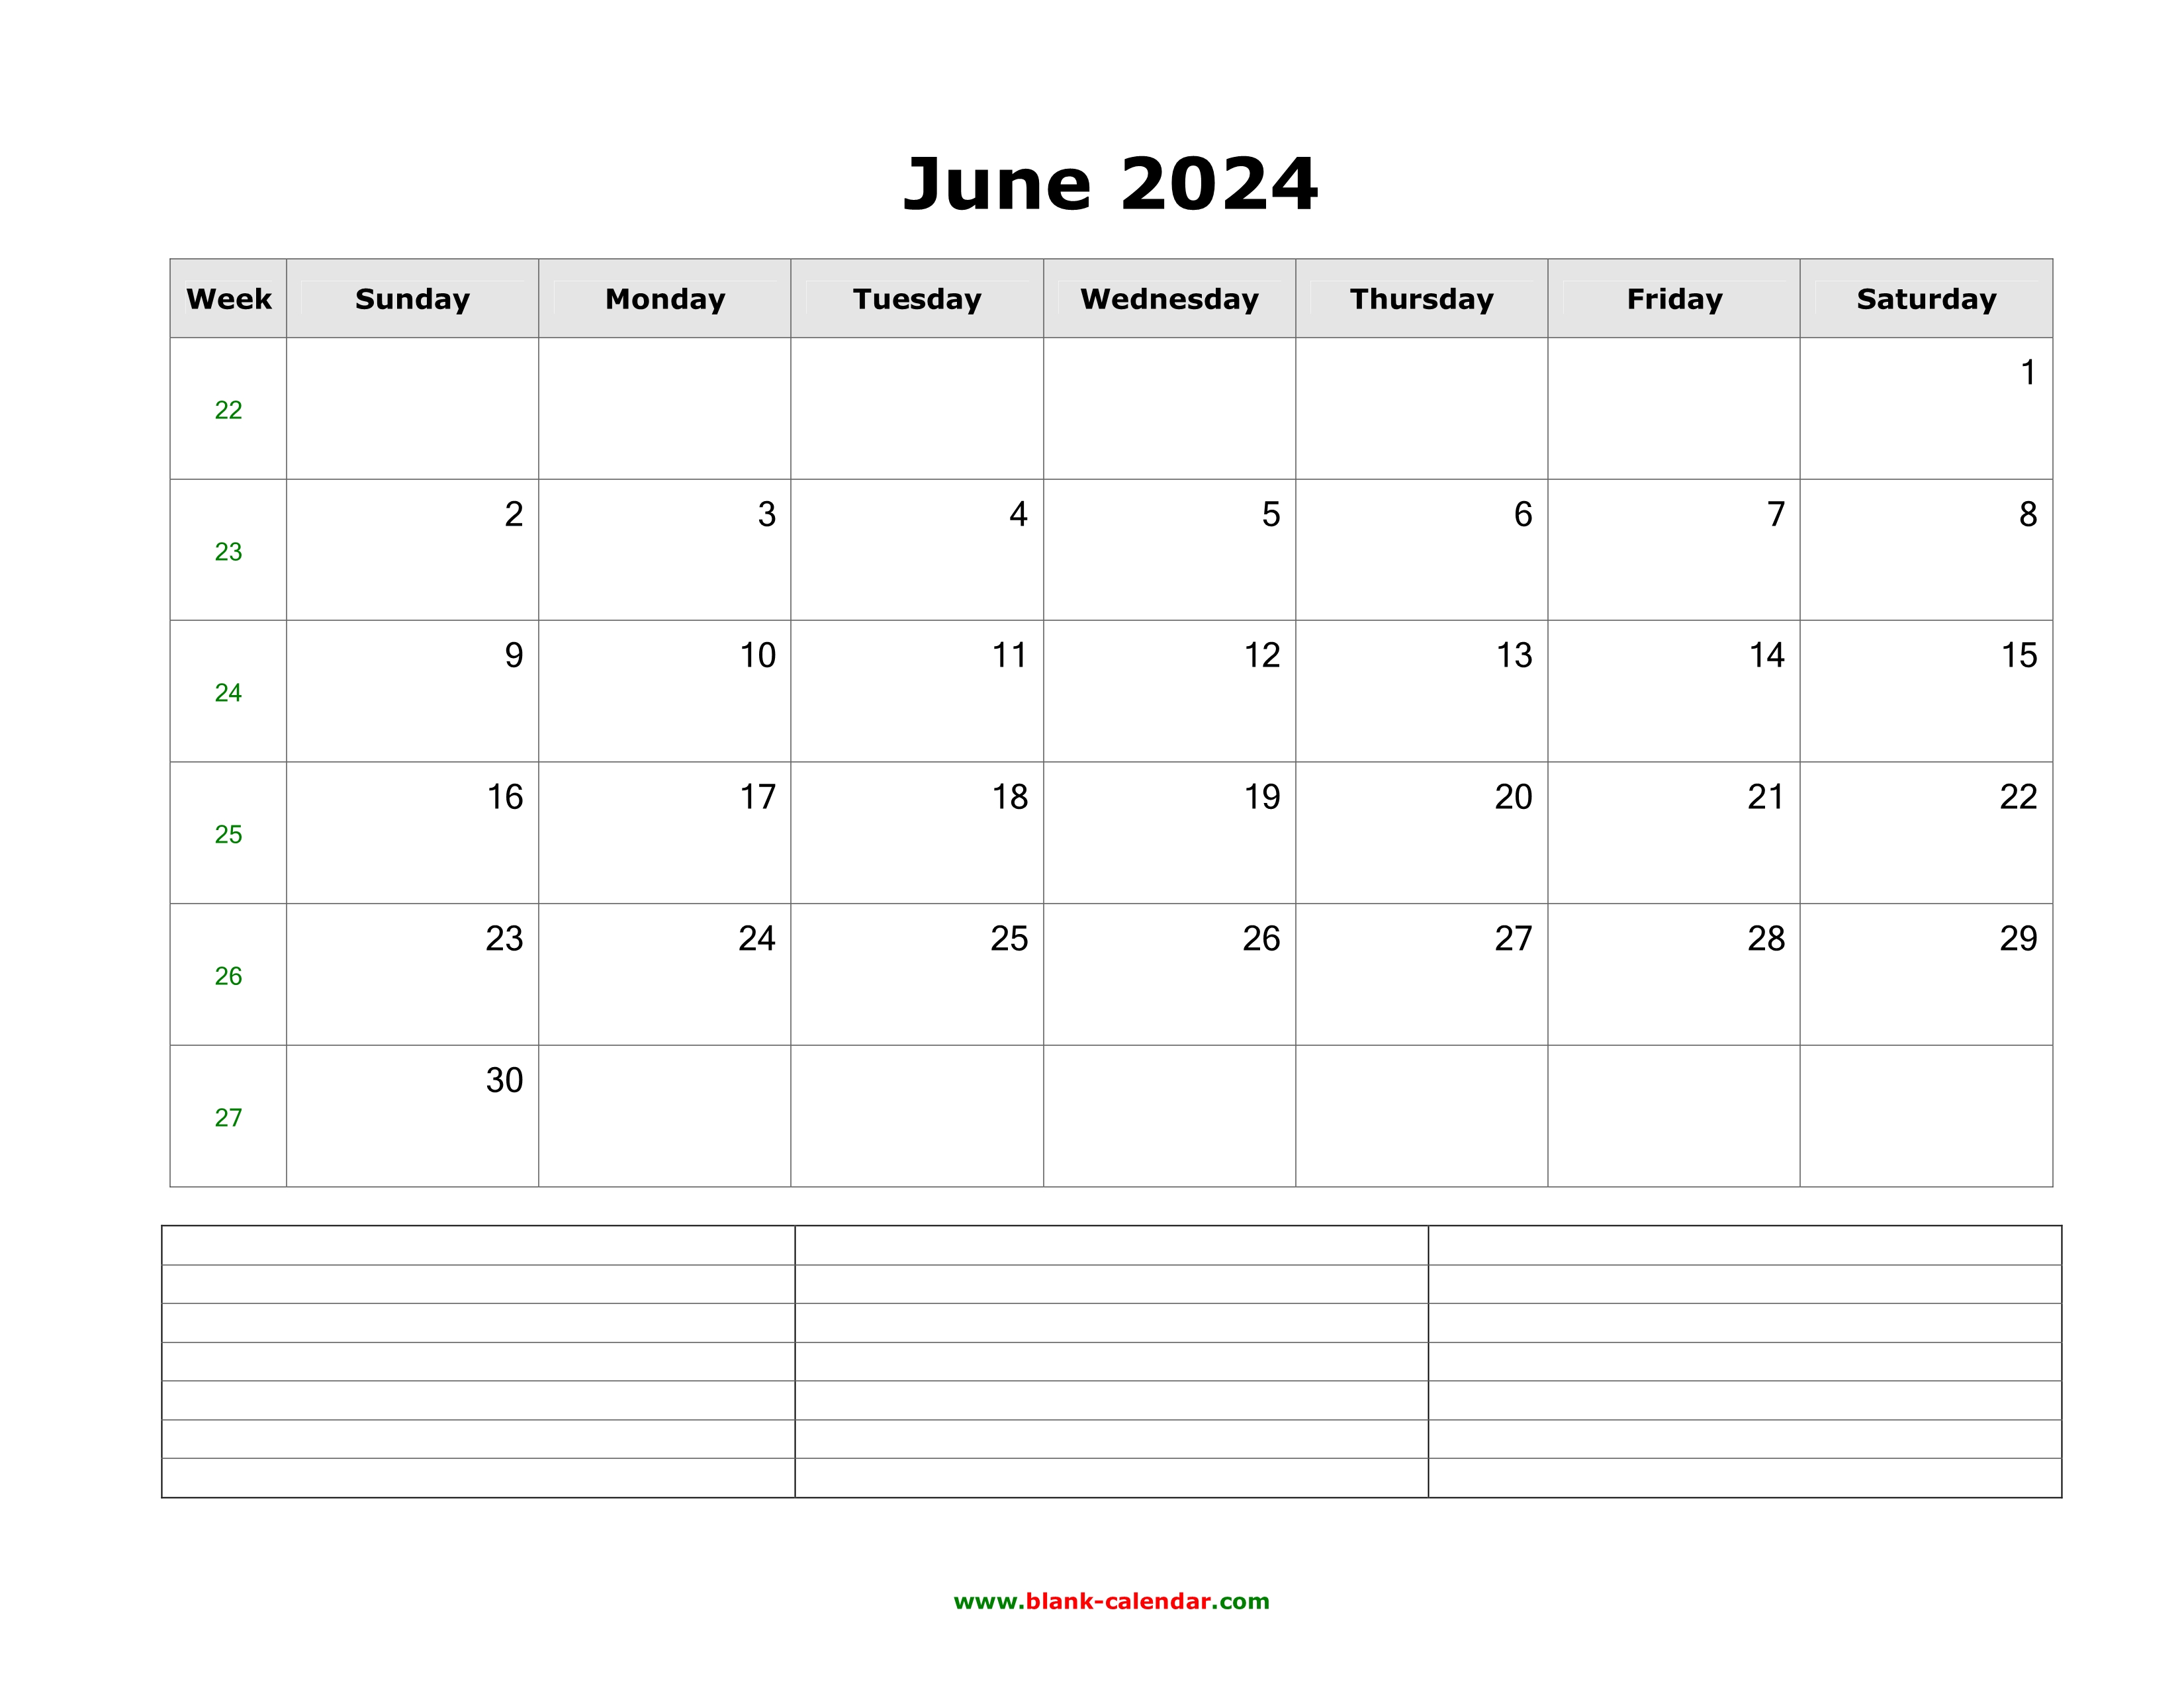 download-june-2024-blank-calendar-with-space-for-notes-horizontal